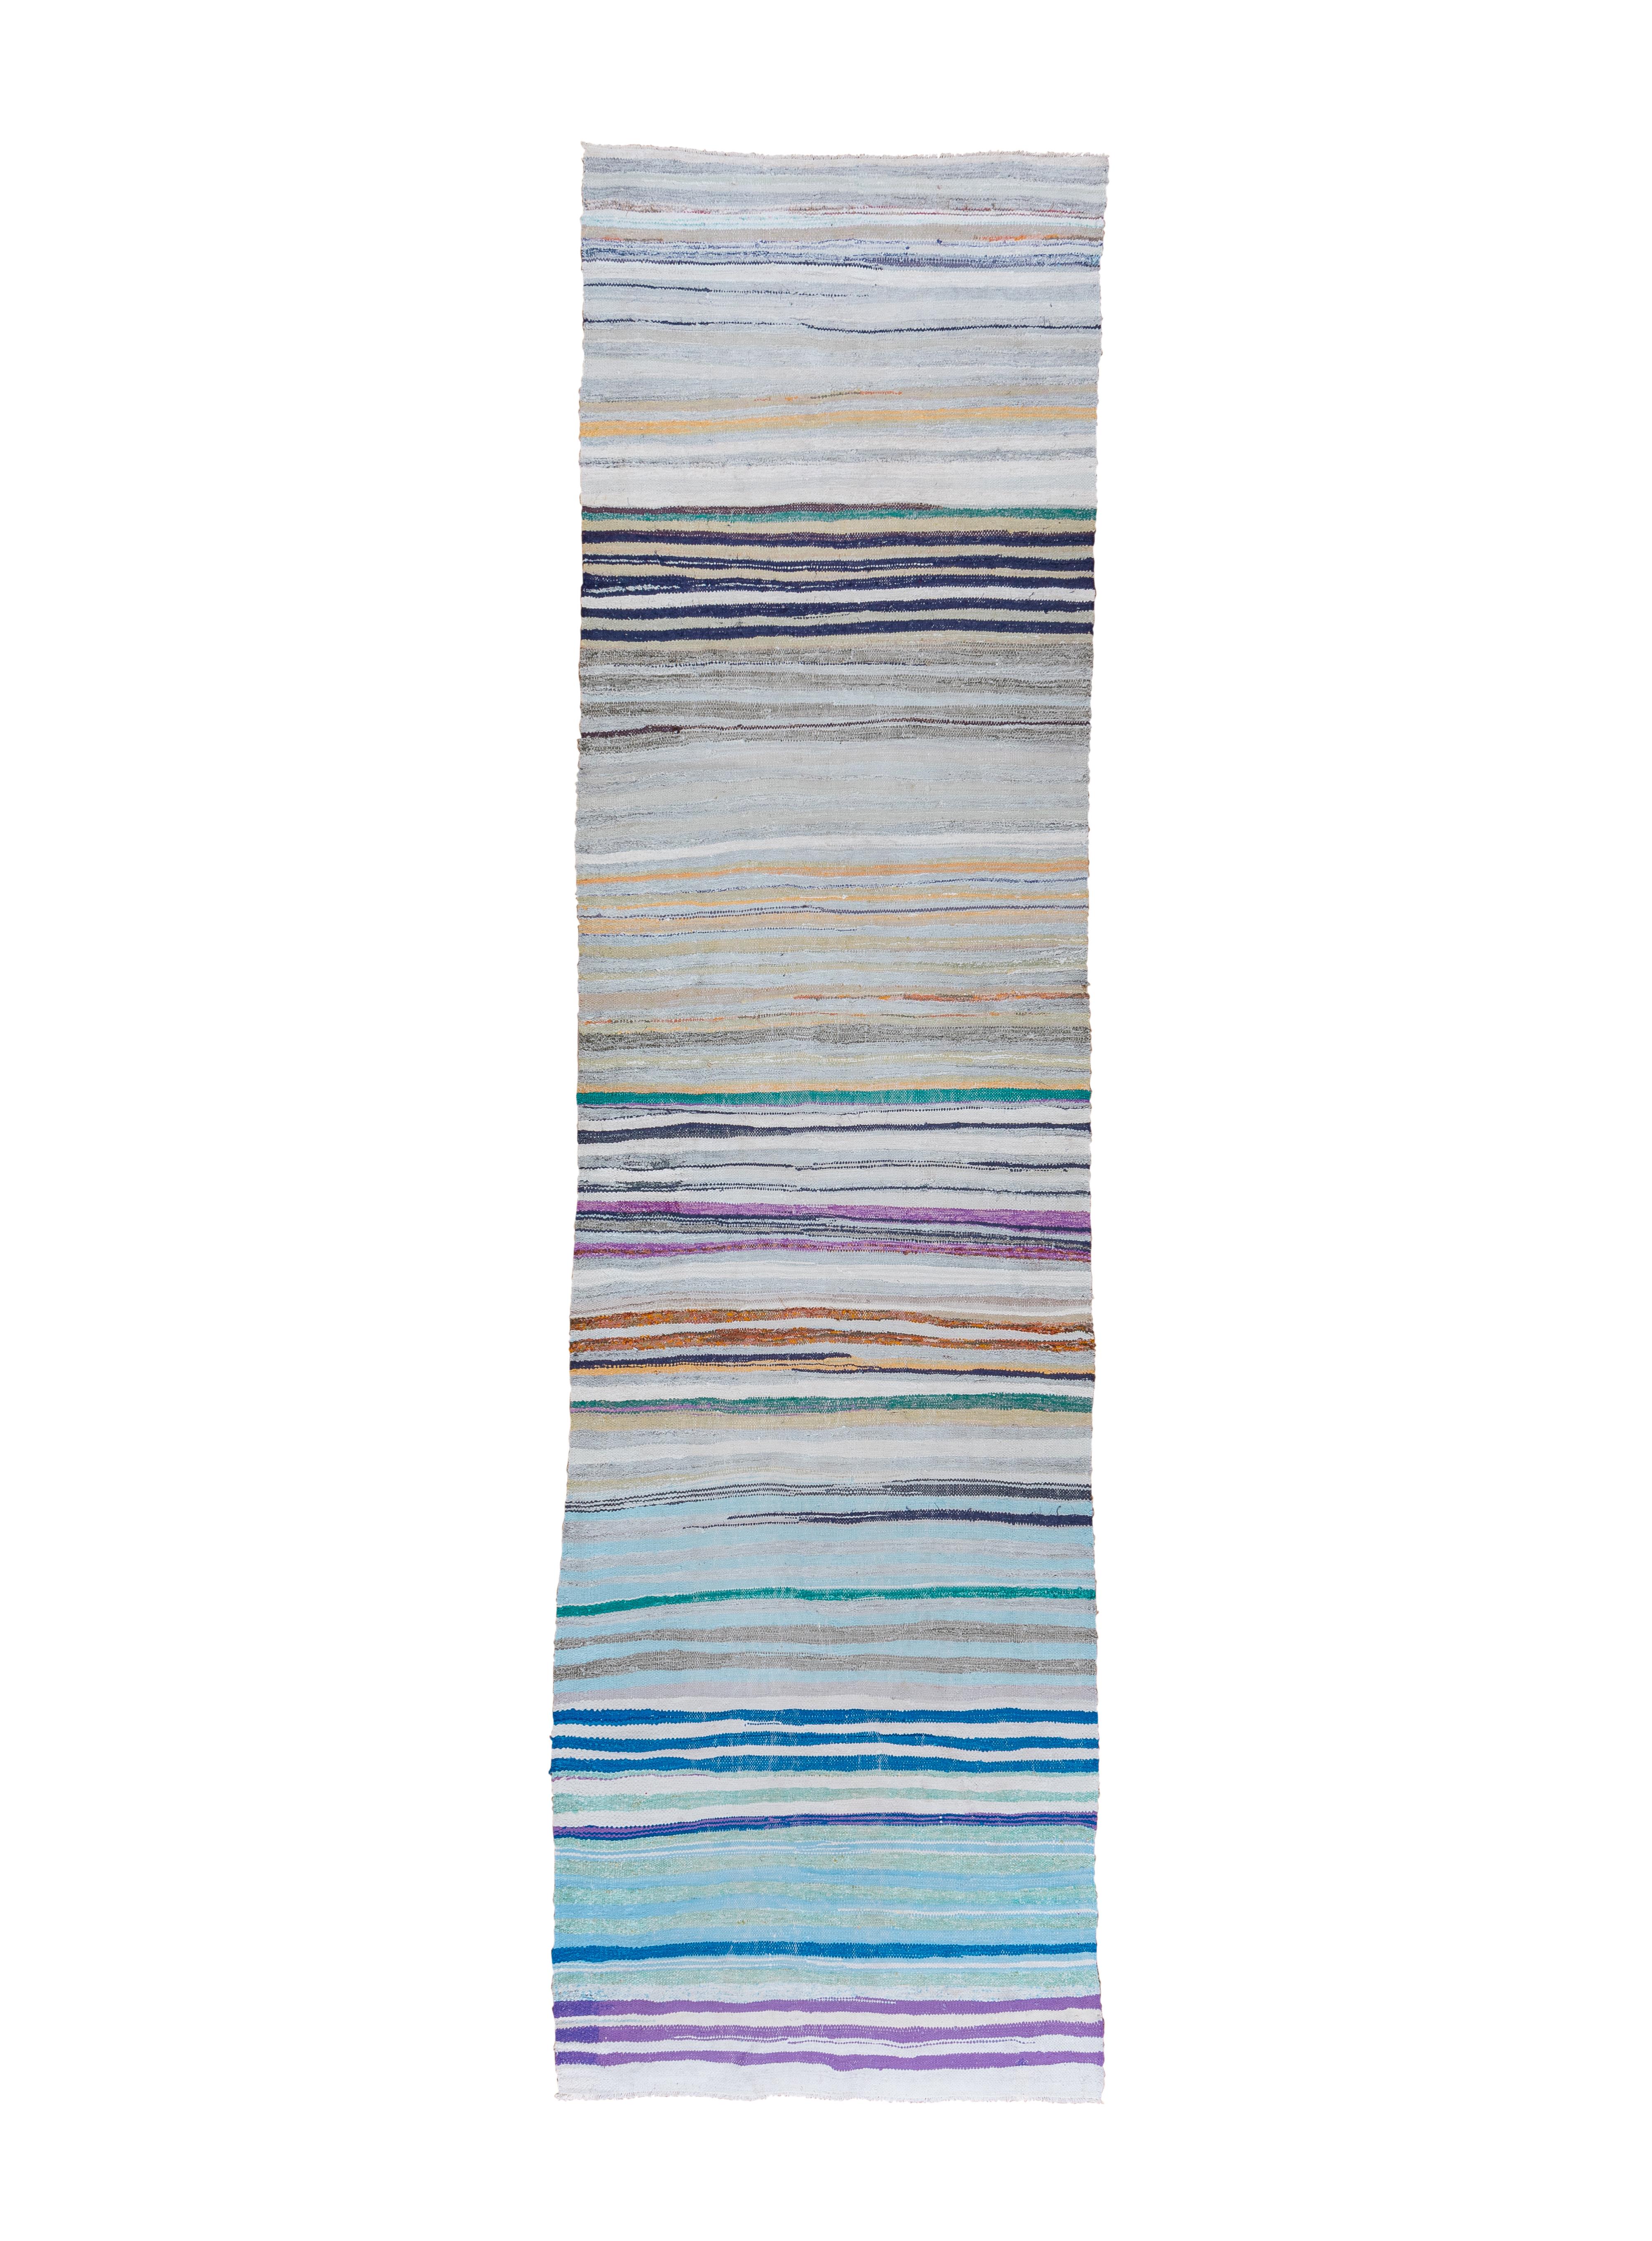 This pileless runner is composed of fabric strips from garments or household décor, bound by thin cotton cords. The colours vary throughout, in no particular order, including shades of blue, creams, teal, brown, beige and rust. Ideally the strips